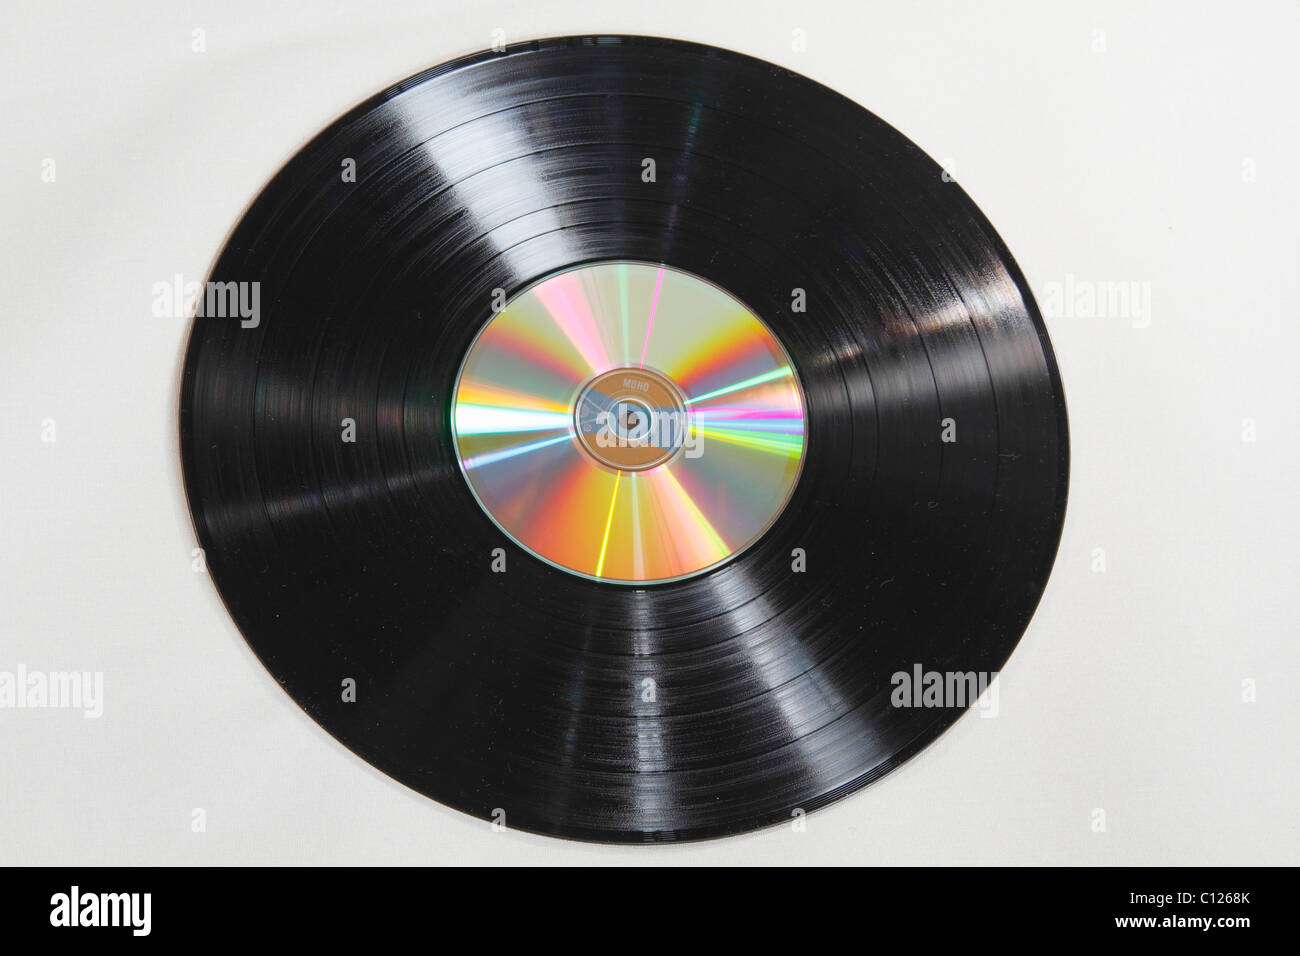 CD lying on a record Stock Photo